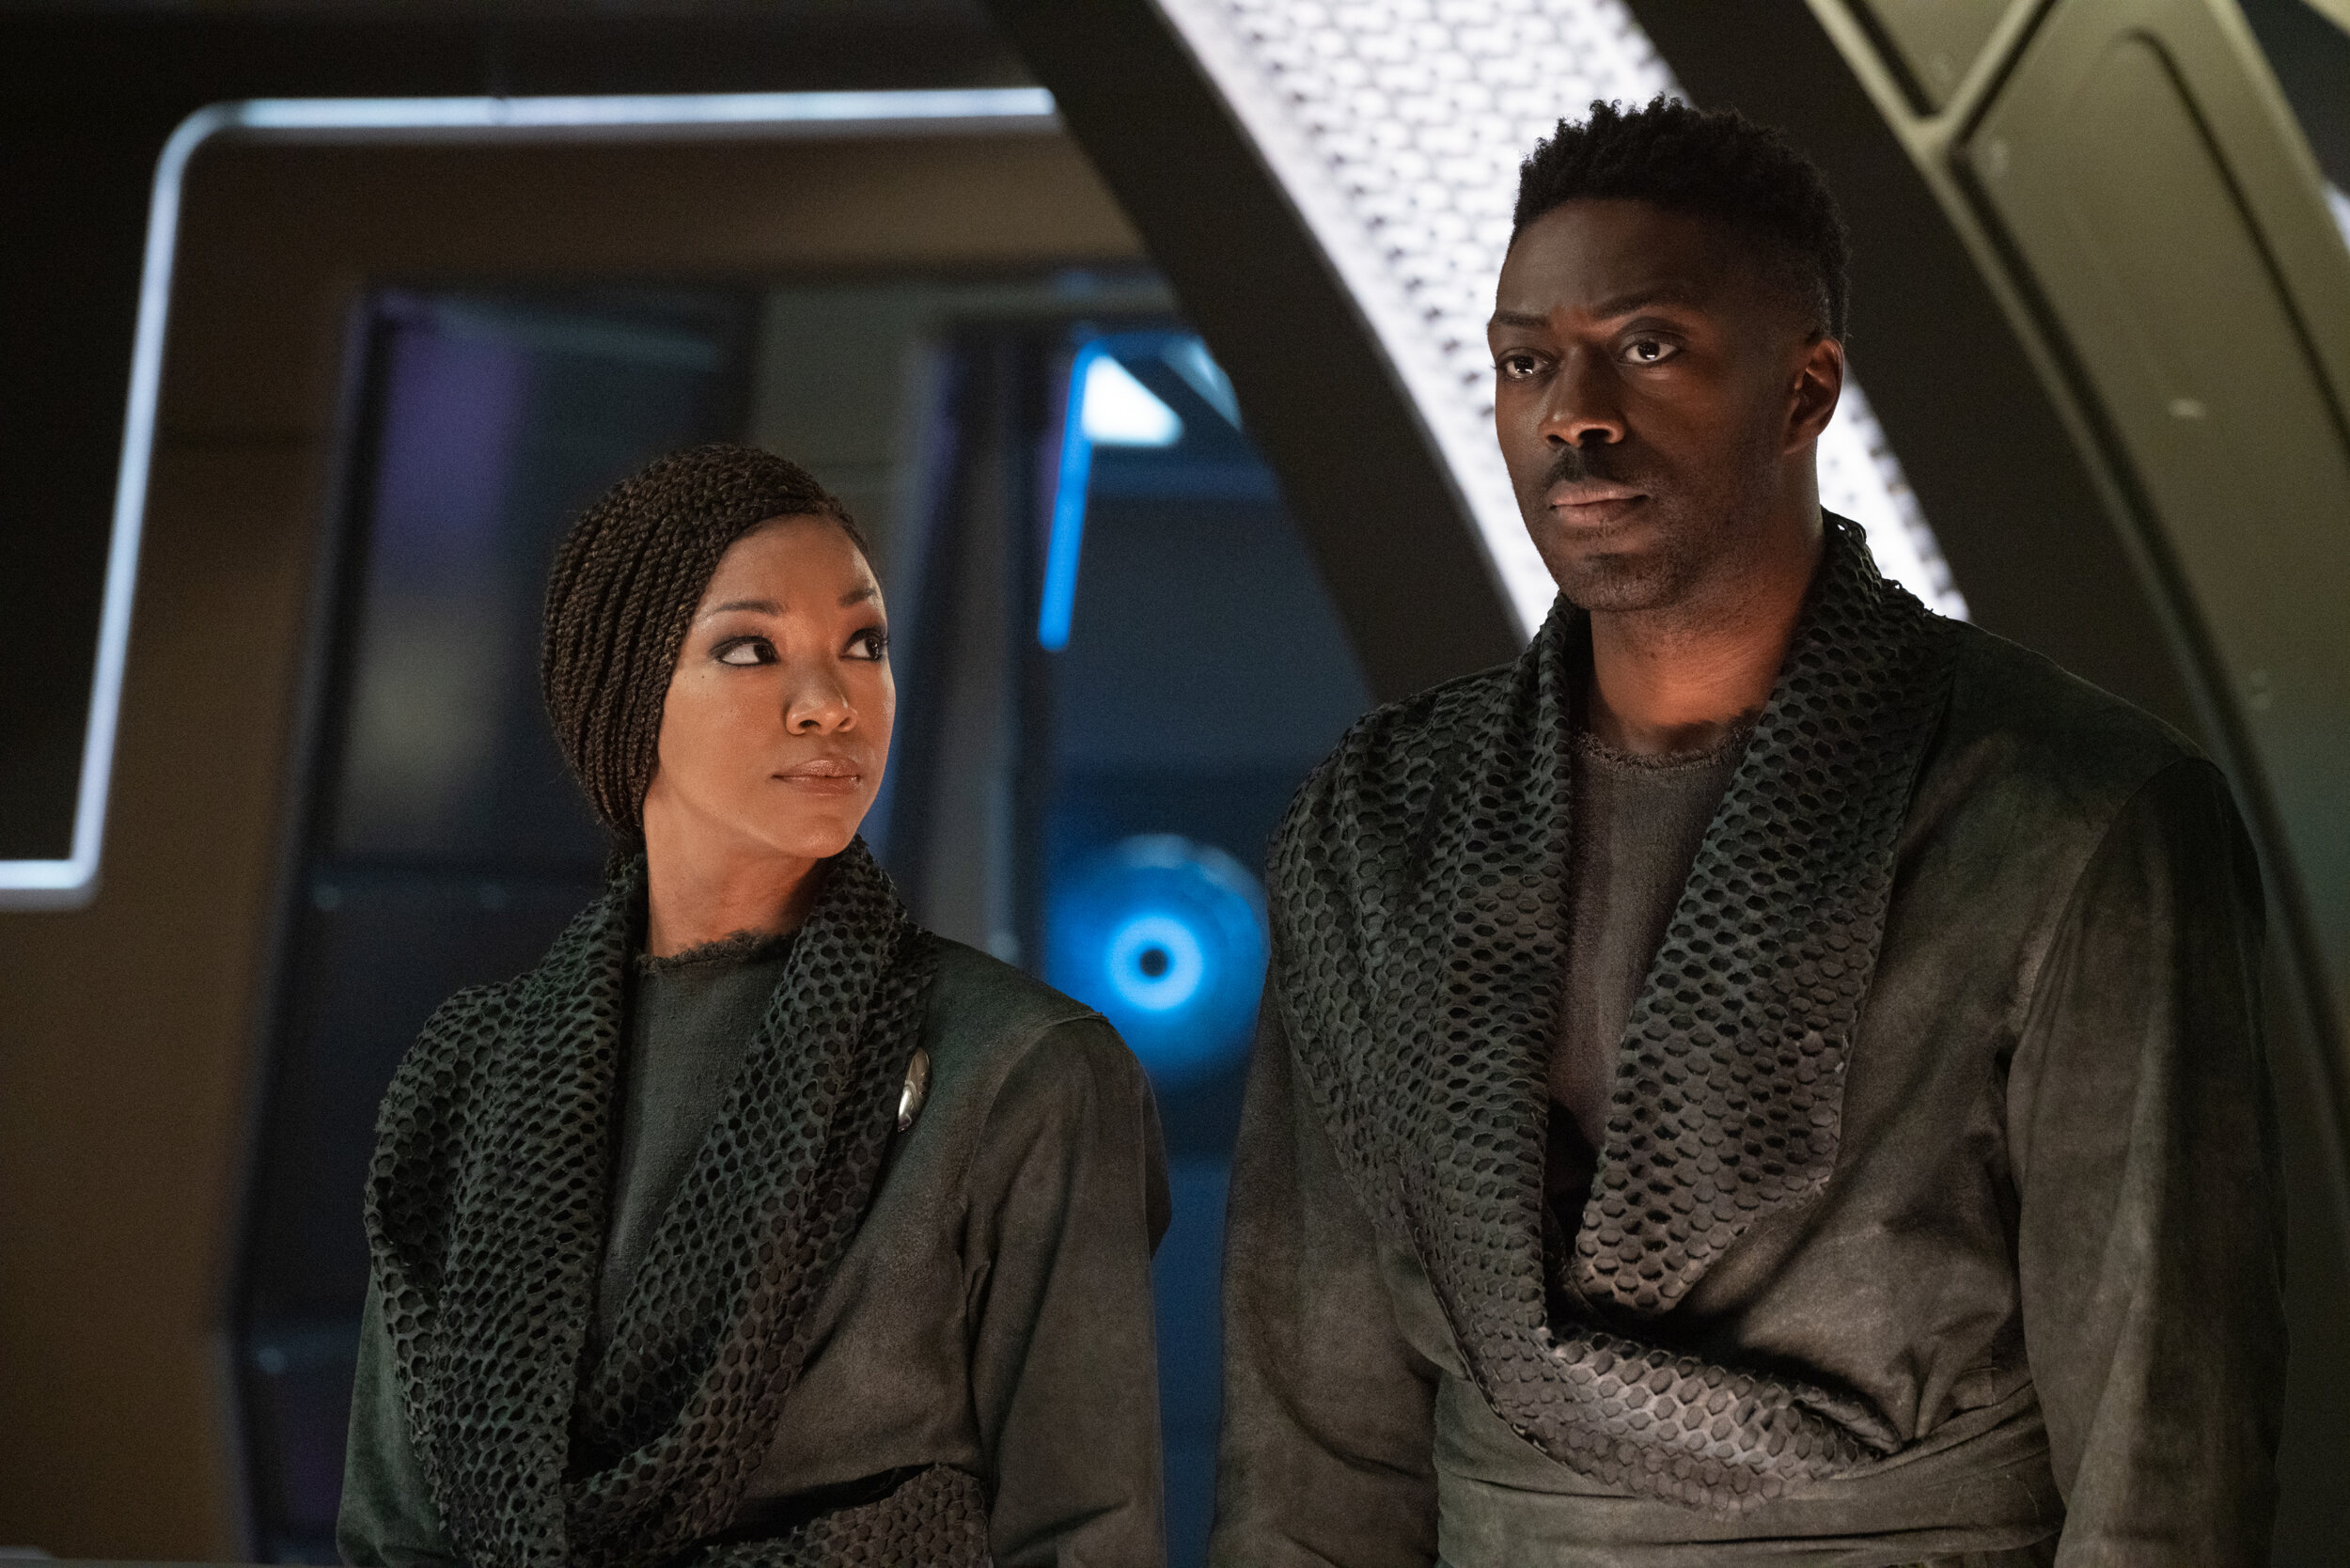   "The Sanctuary" -- Ep#308 -- Pictured: Sonequa Martin-Green as Commander Burnham and David Ajala as Book of the CBS All Access series STAR TREK: DISCOVERY. Photo Cr: Michael Gibson/CBS ©2020 CBS Interactive, Inc. All Rights Reserved.  